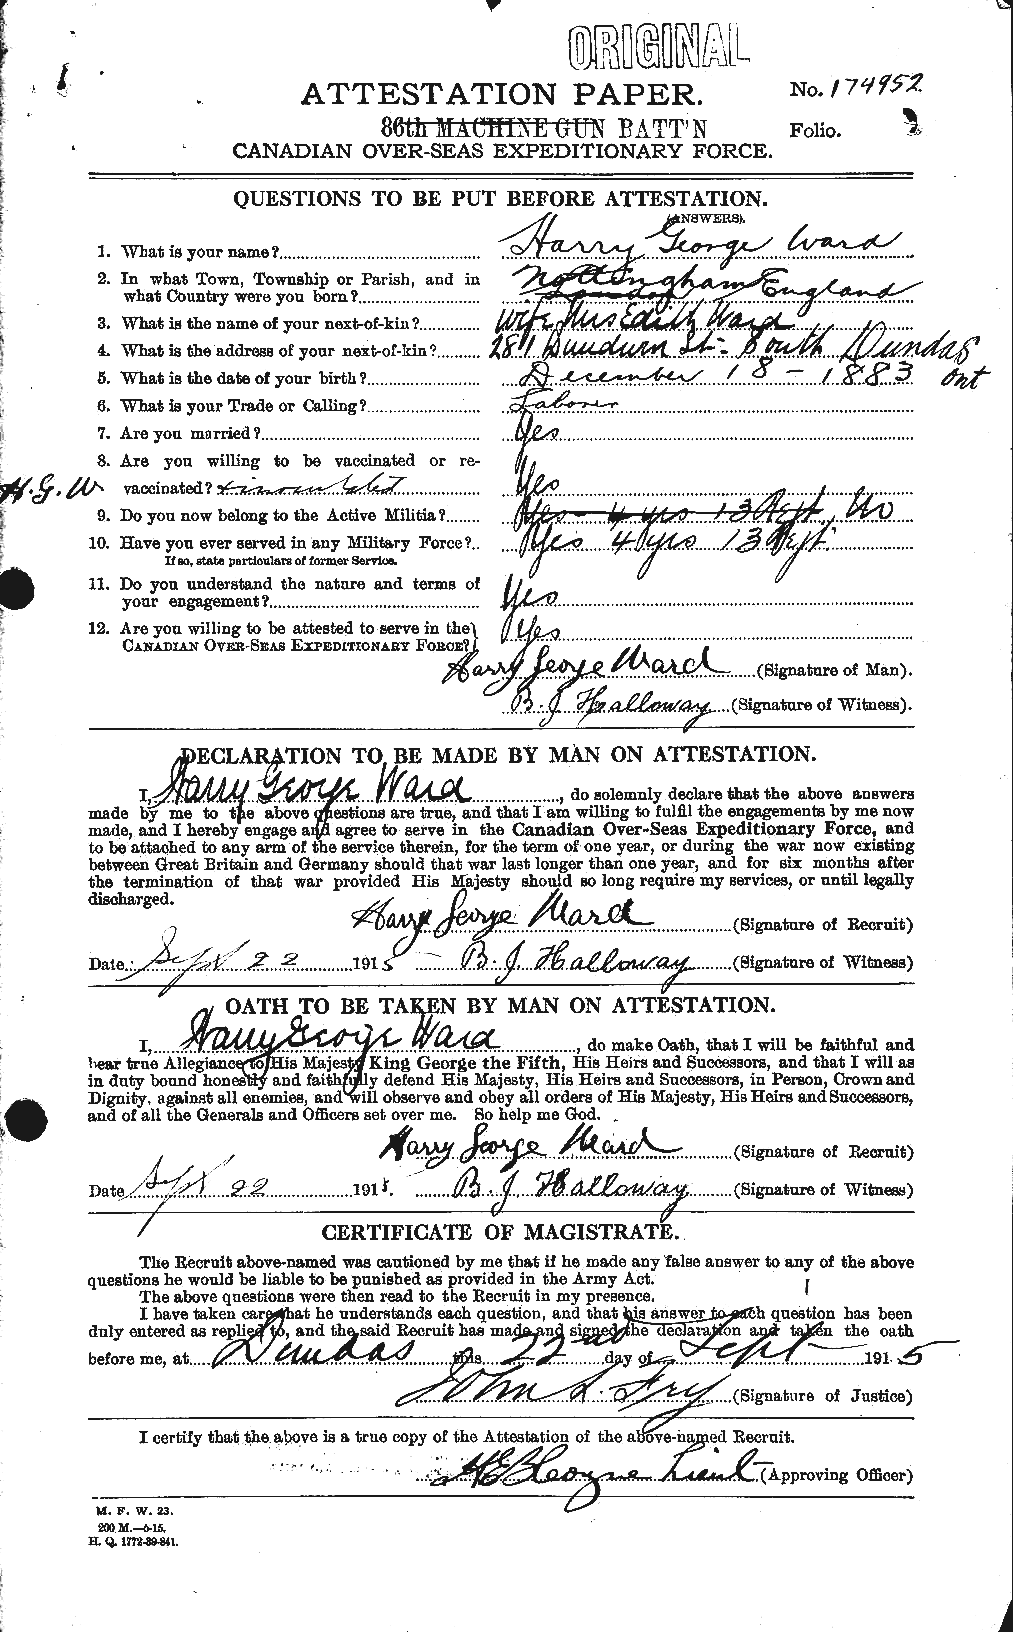 Personnel Records of the First World War - CEF 657814a